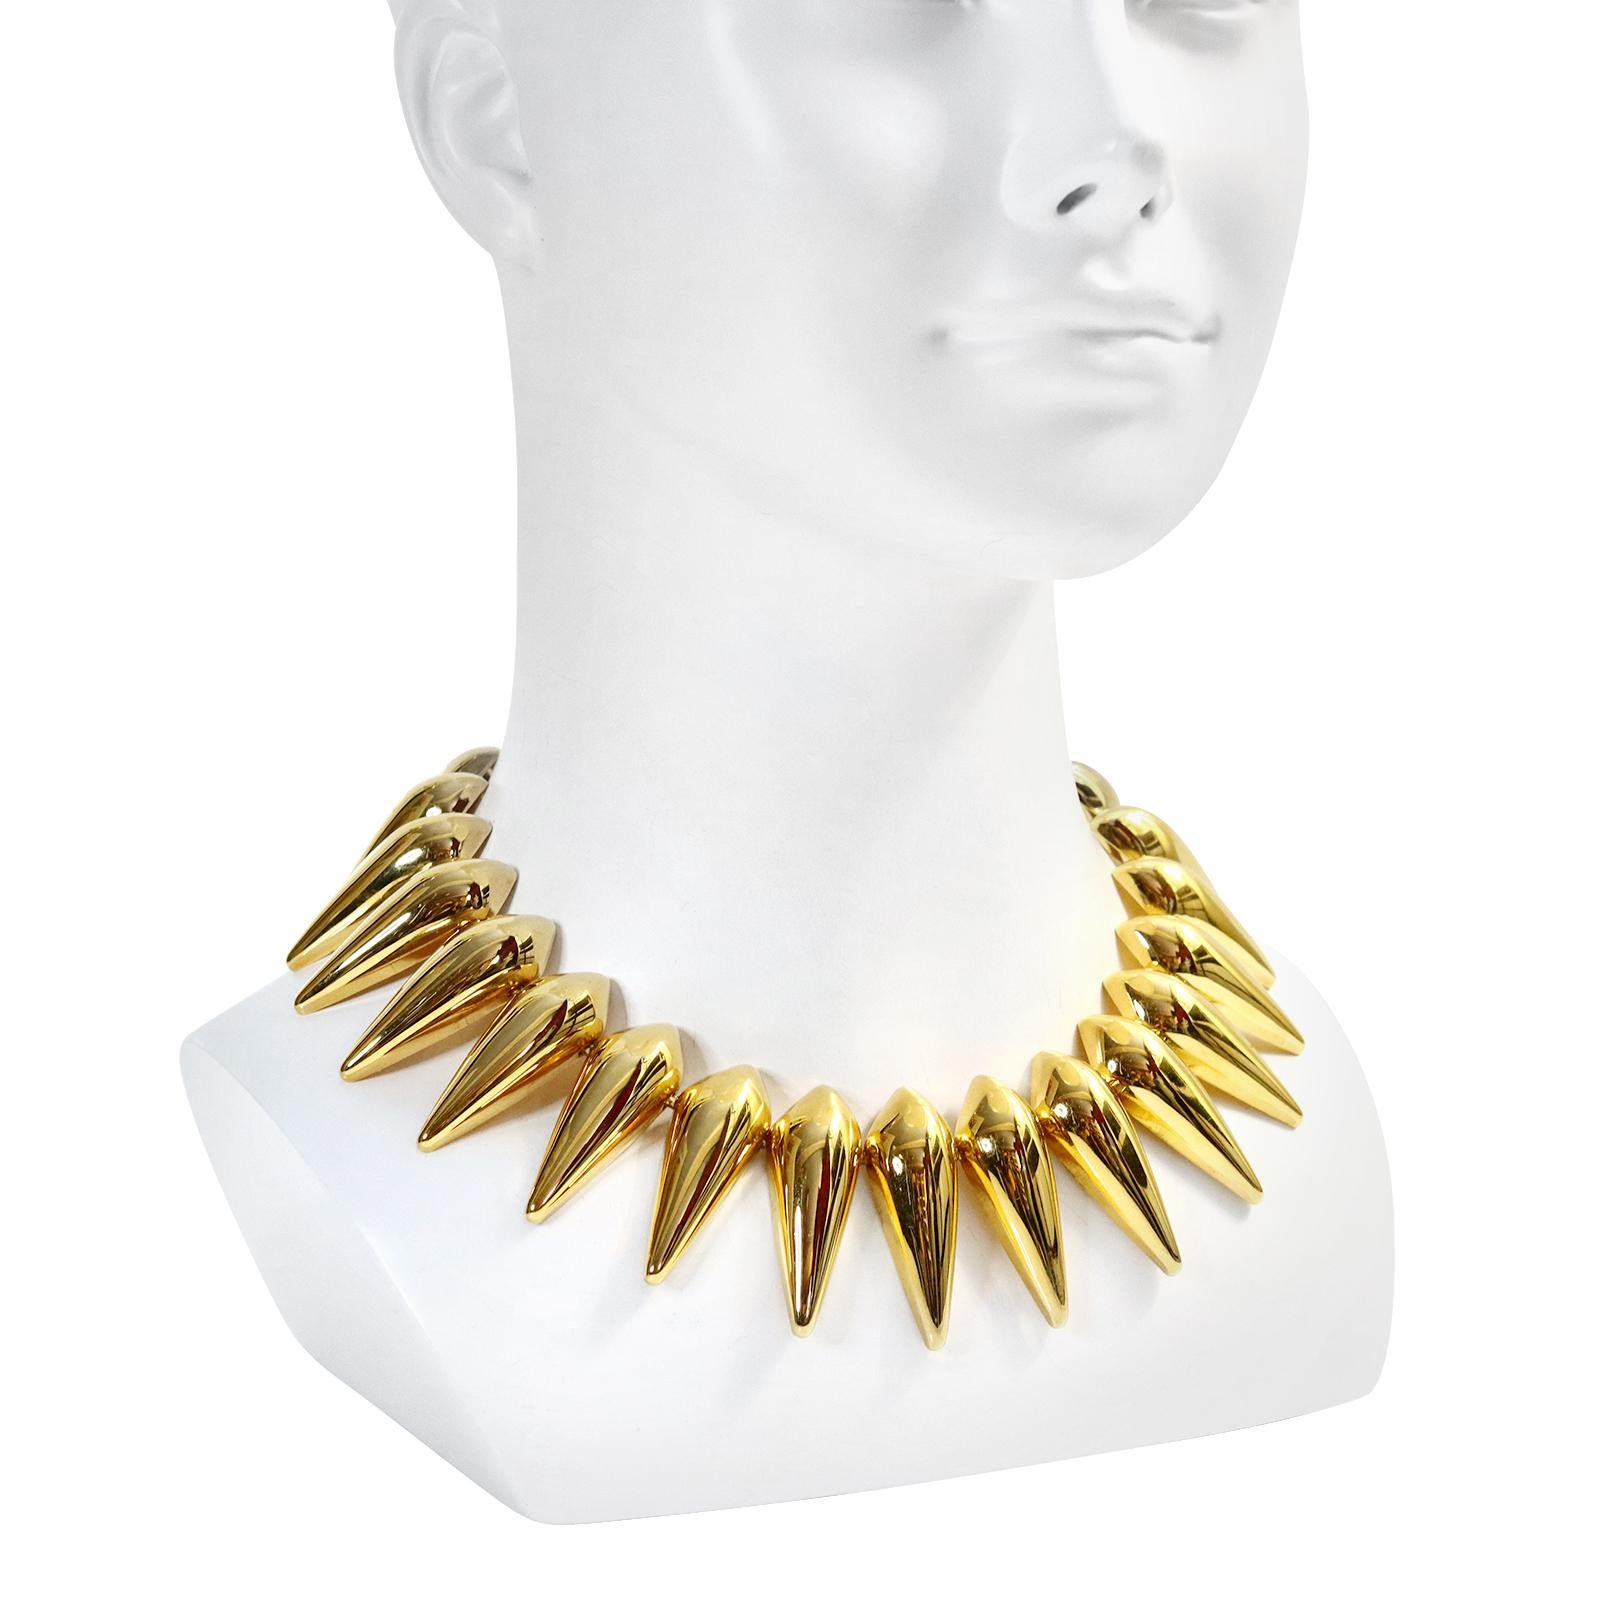 Modern Vintage Monet Spiky Gold Tone Necklace Circa 1970s For Sale